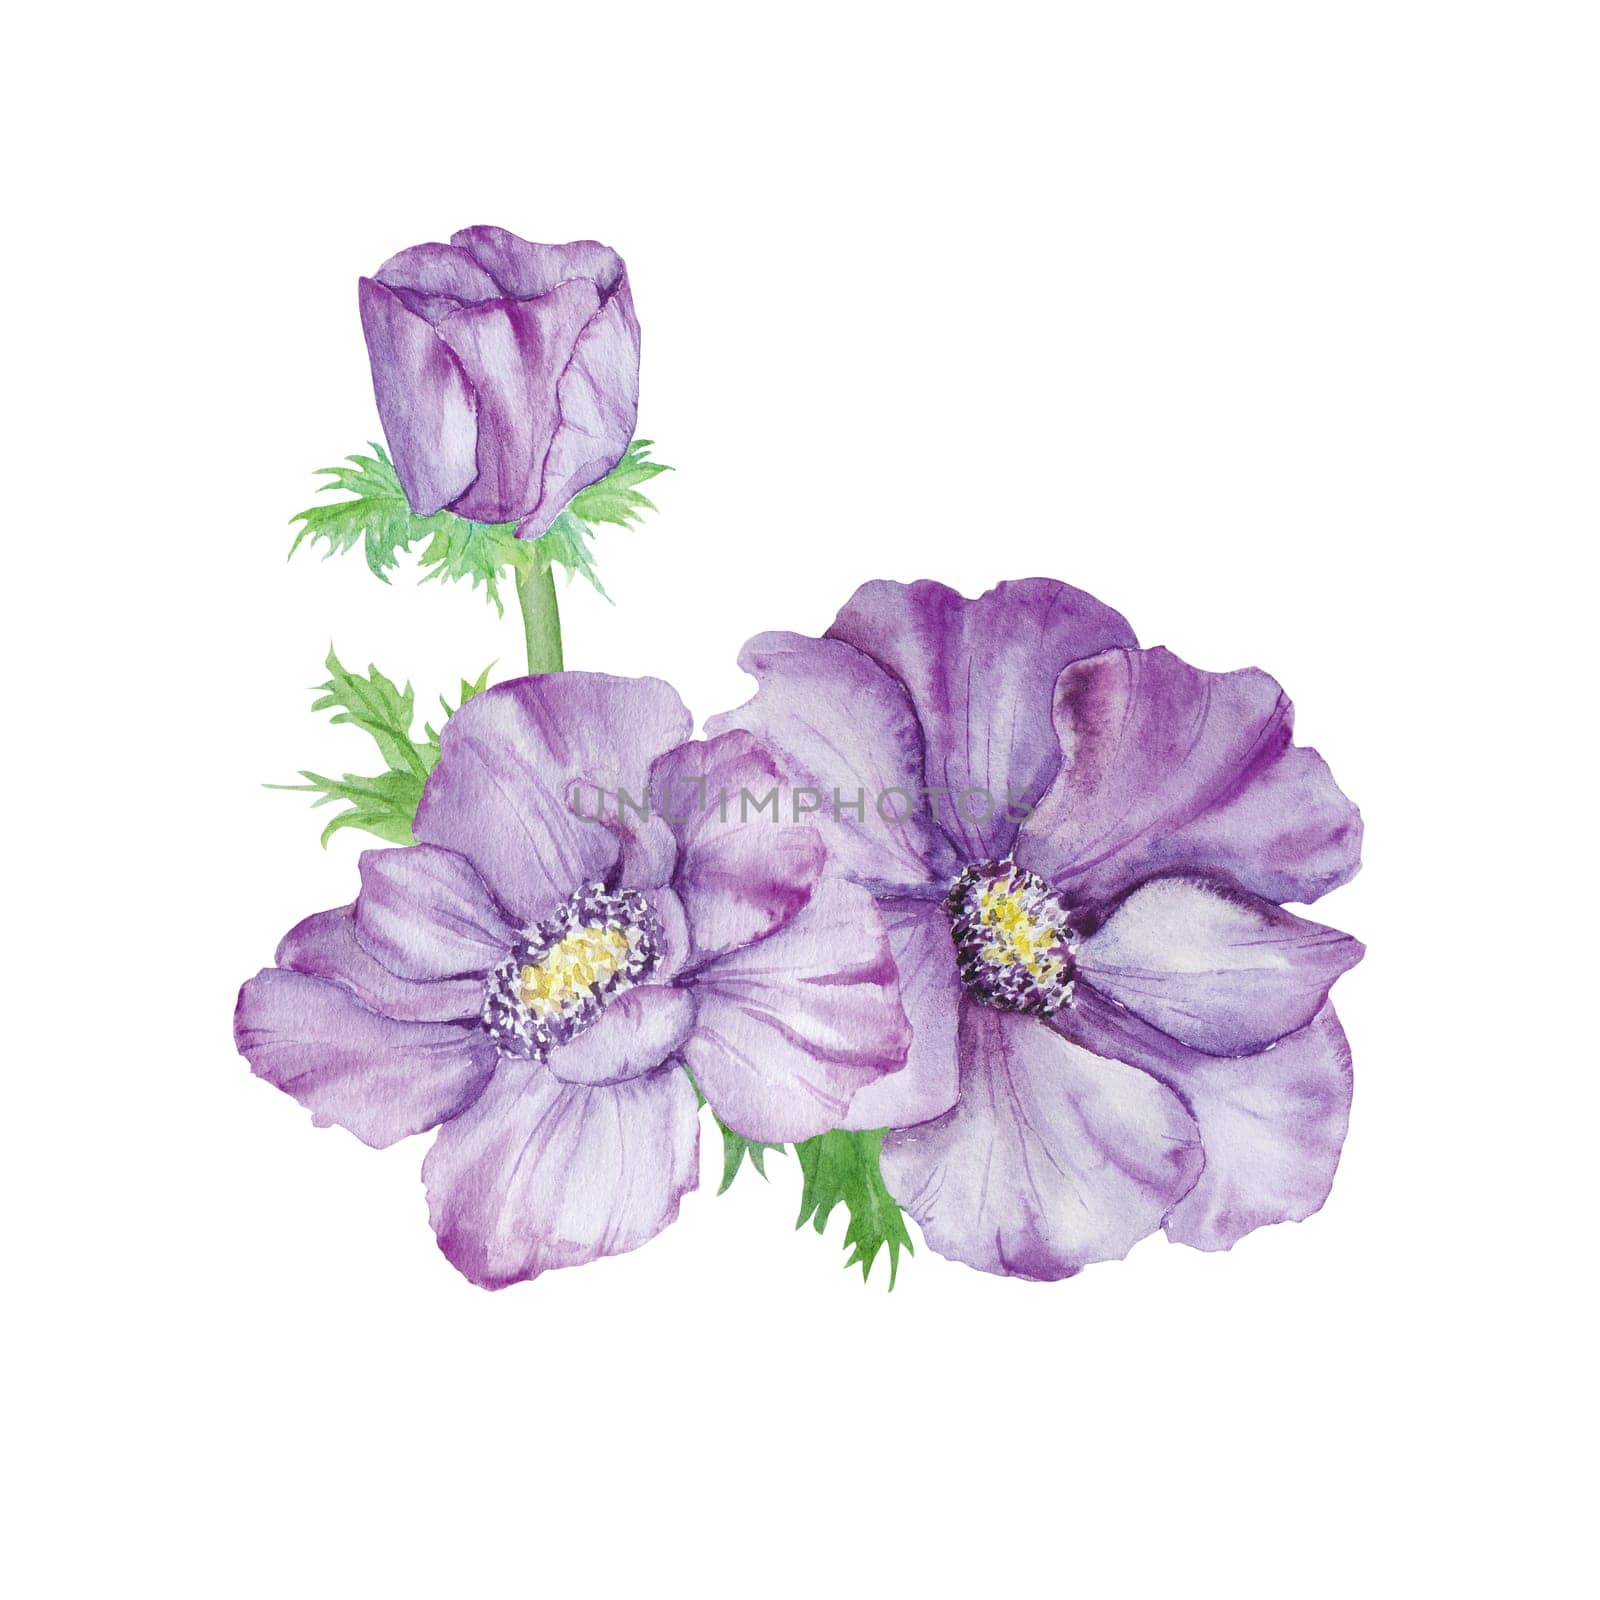 Watercolor hand drawn purple anemones with green leaves isolated on white background. by florainlove_art